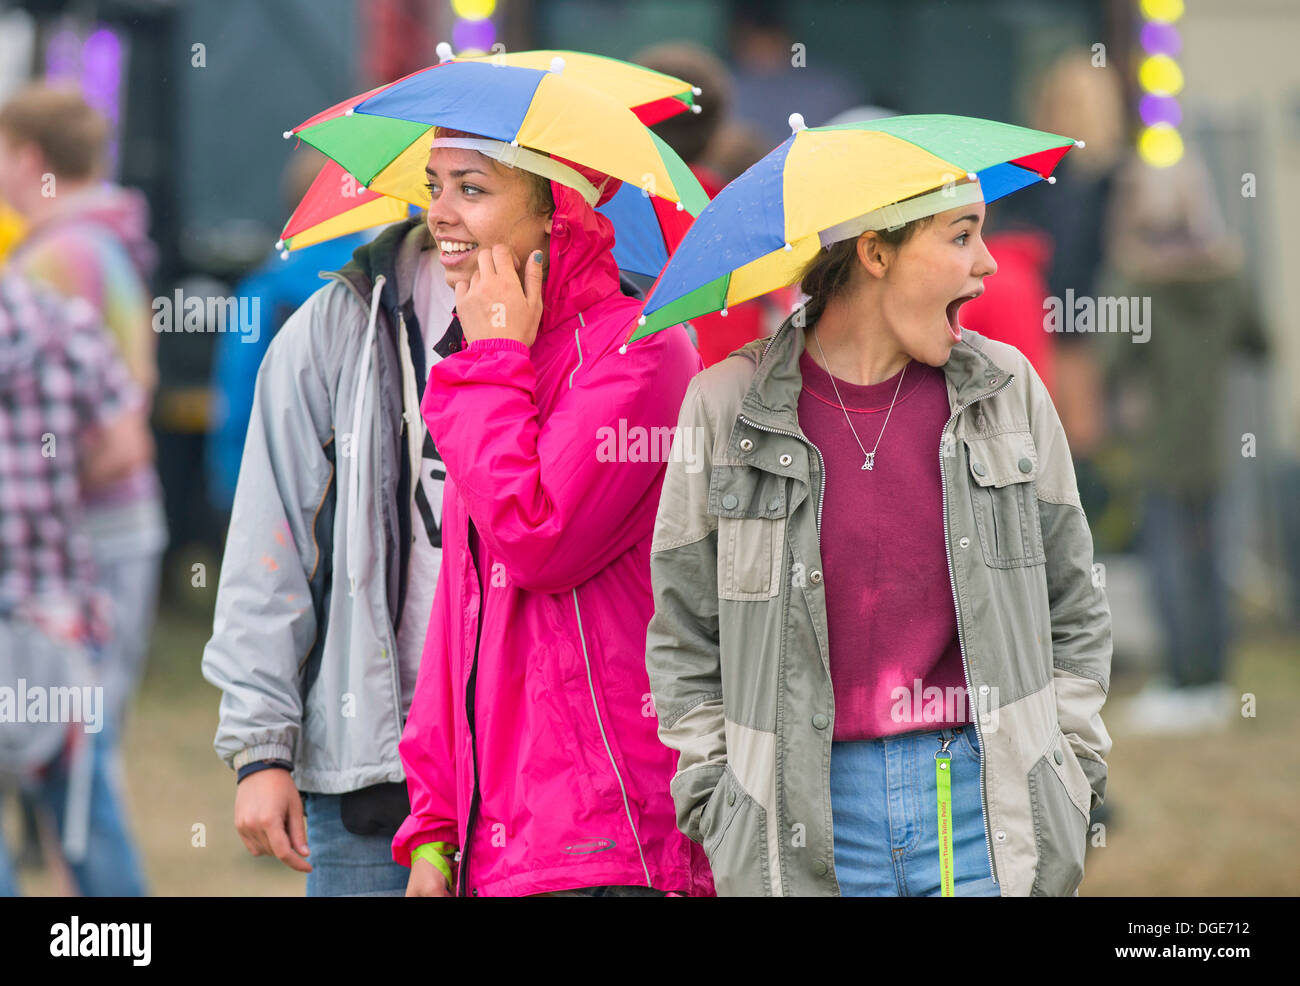 The Reading Festival - girls with umbrella hats head for the main stage Aug 2013 Stock Photo